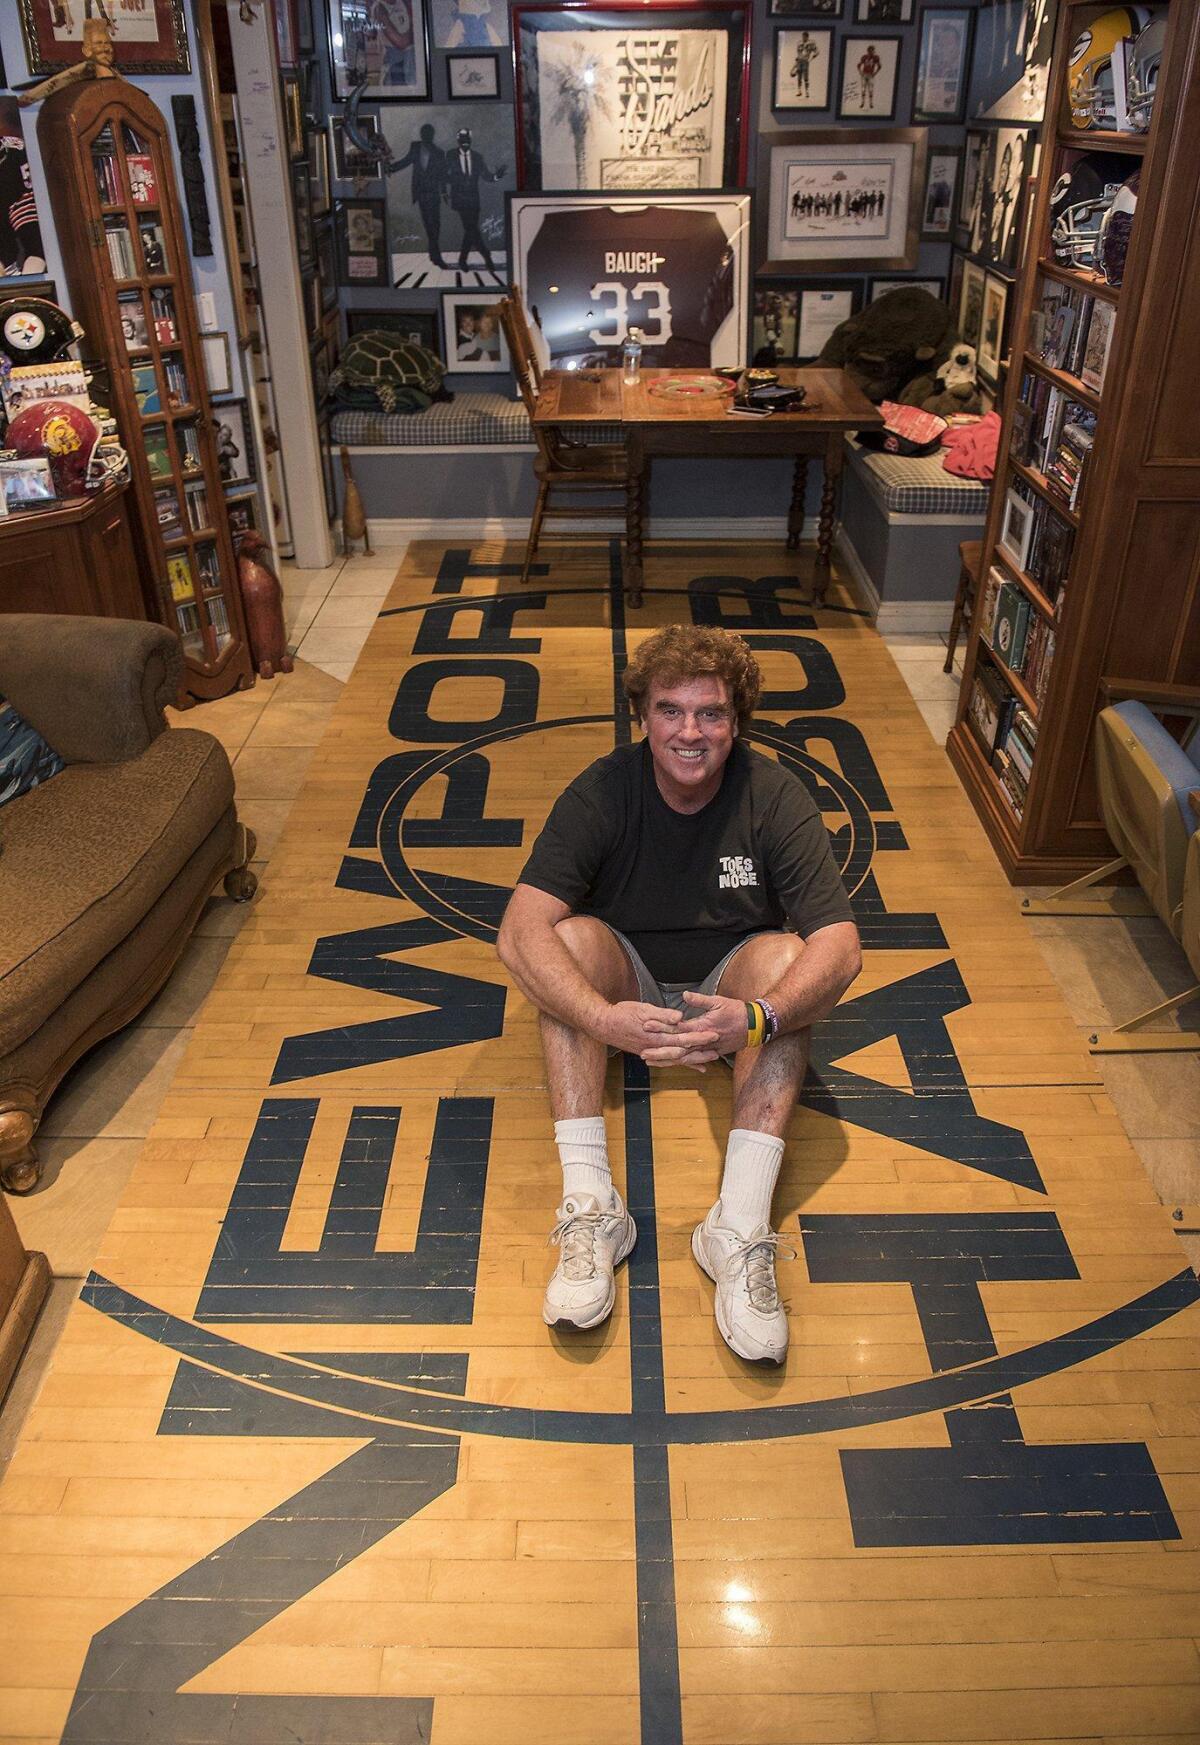 Mark Keys, a Newport Harbor High alumnus, was able to acquire the center piece of the old Newport Harbor gym floor and installed it in his home in Costa Mesa.